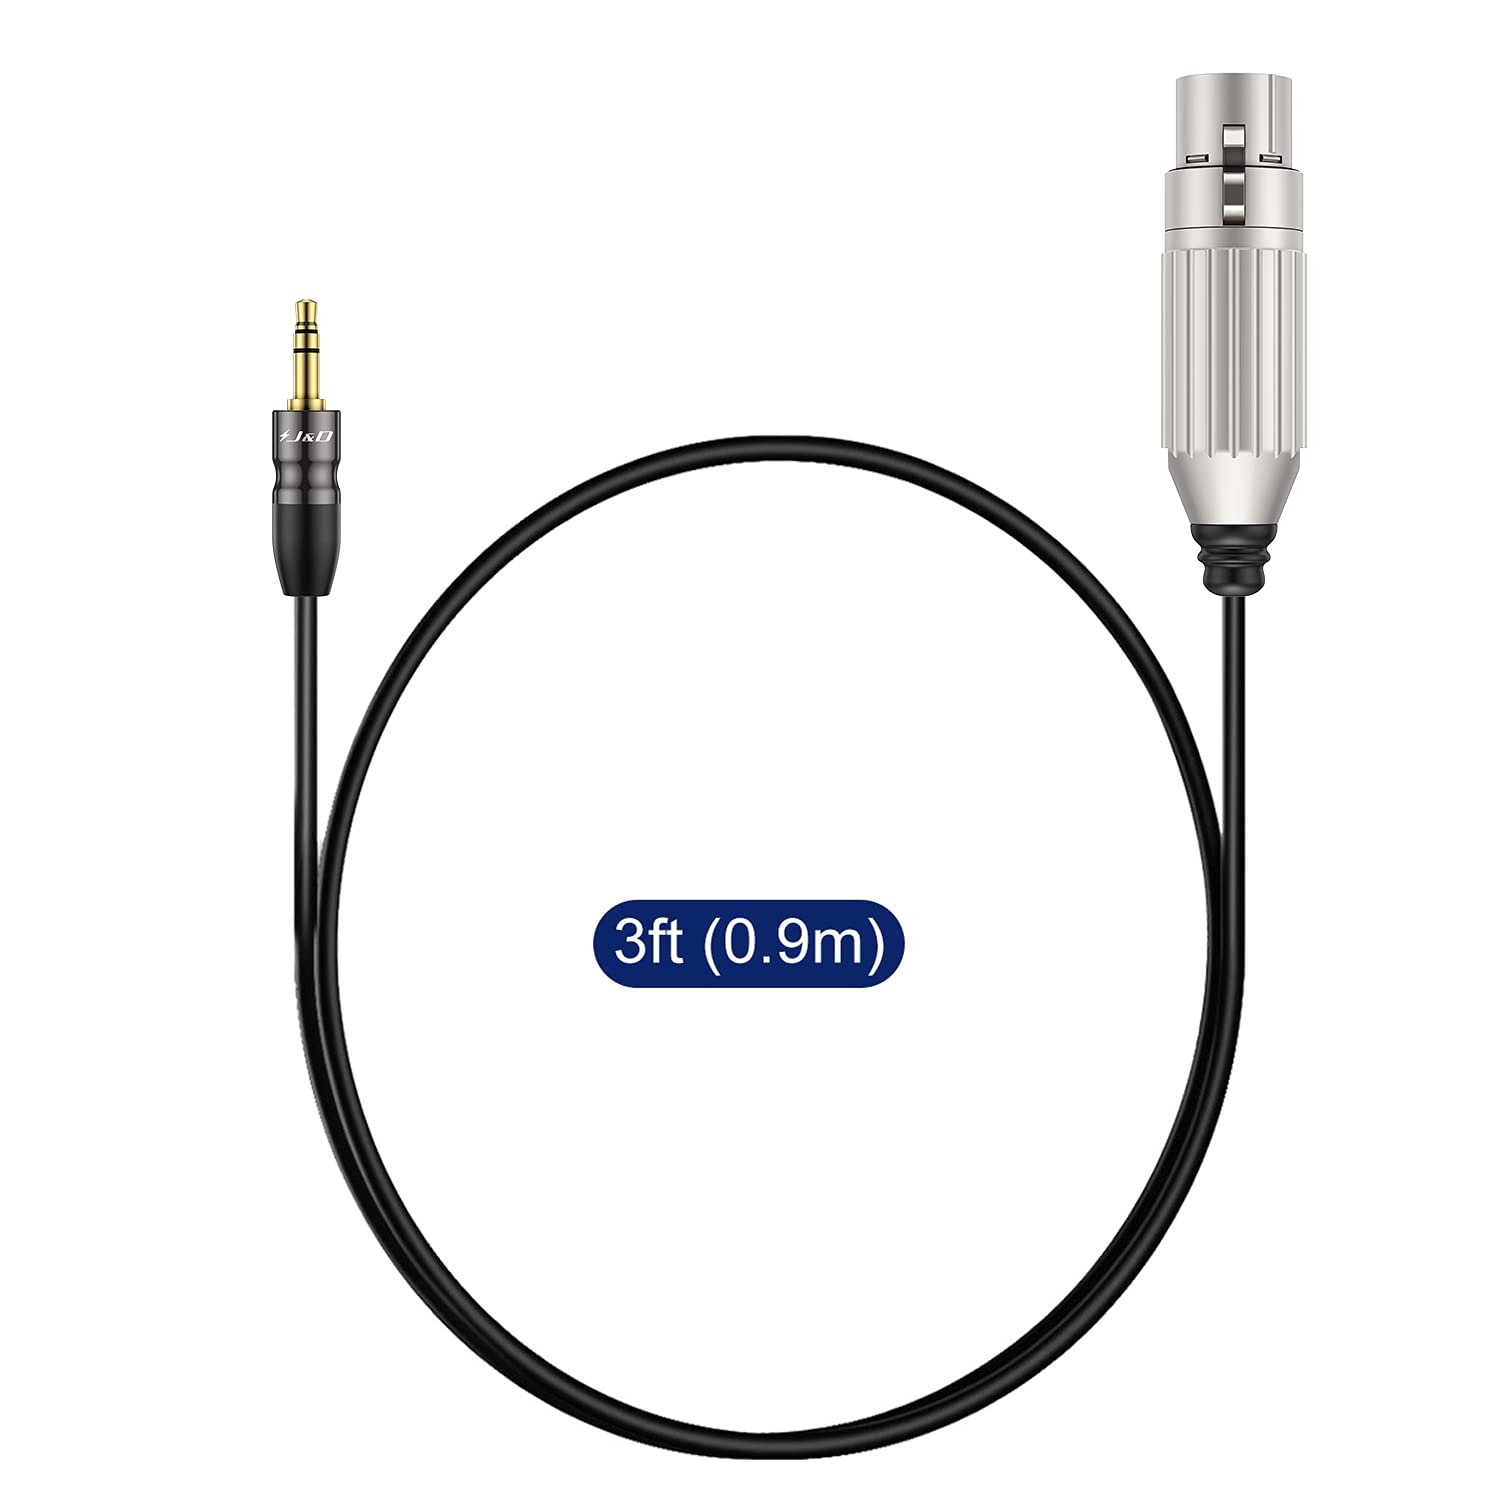 3.5mm TRS Male to XLR Female Balanced Cable